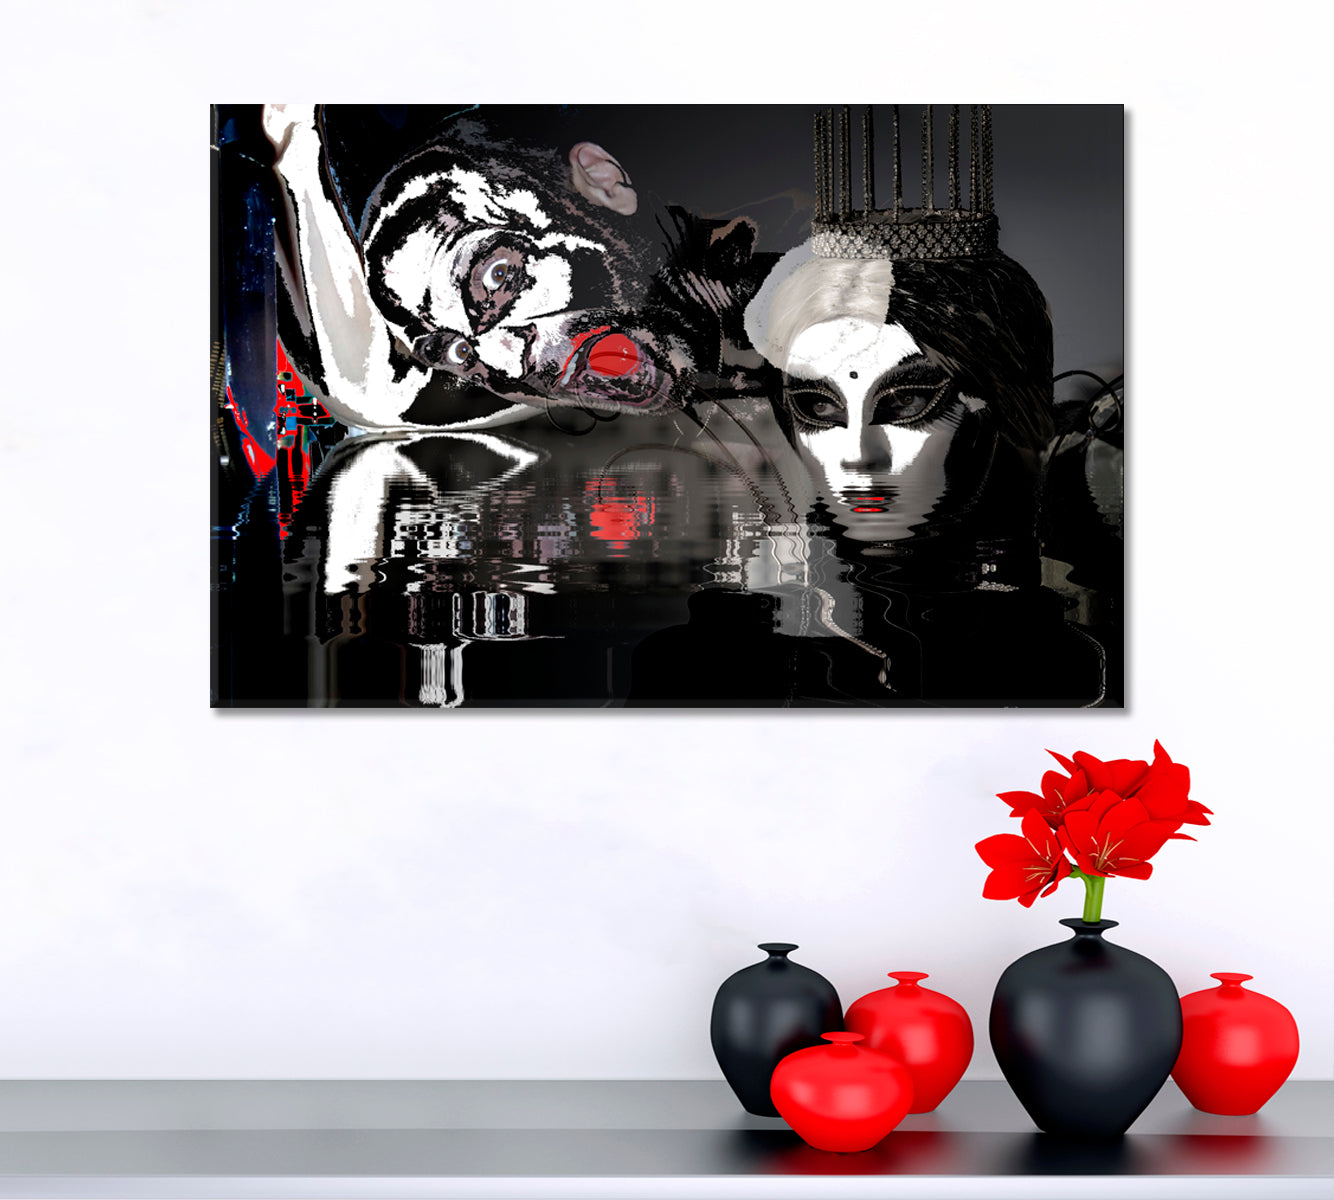 Mysterious Glamour Princess White Mask Crown Screaming Man Surreal Art Surreal Fantasy Large Art Print Décor Artesty   